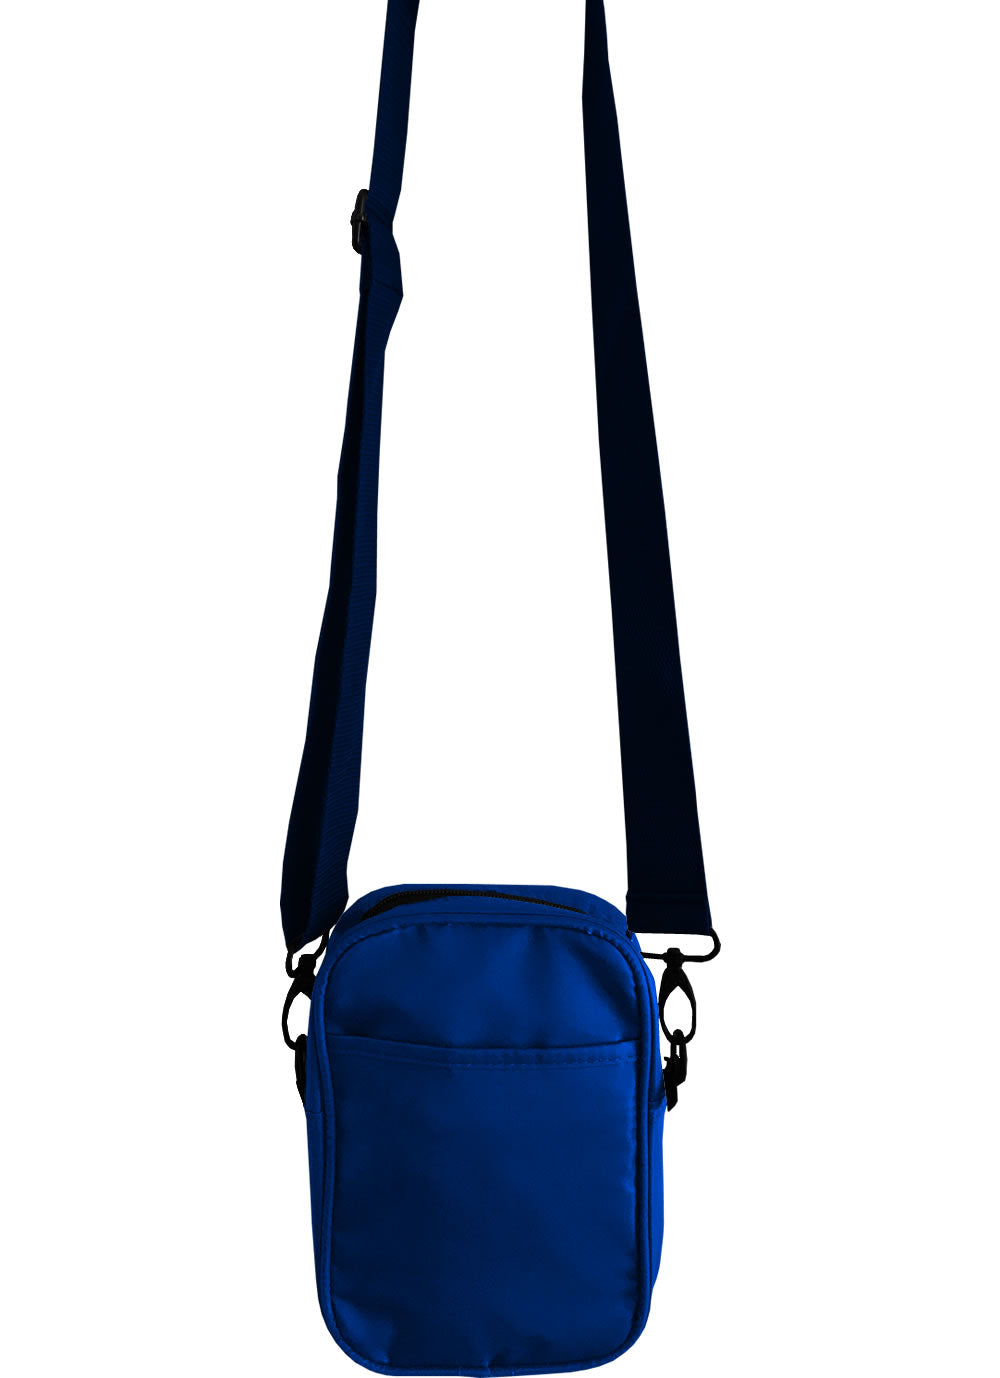 Small Size Sling Bags, Cross Body Bags, Hand Bags,  Black/Blue/Red/Multicolor Under 149, Under